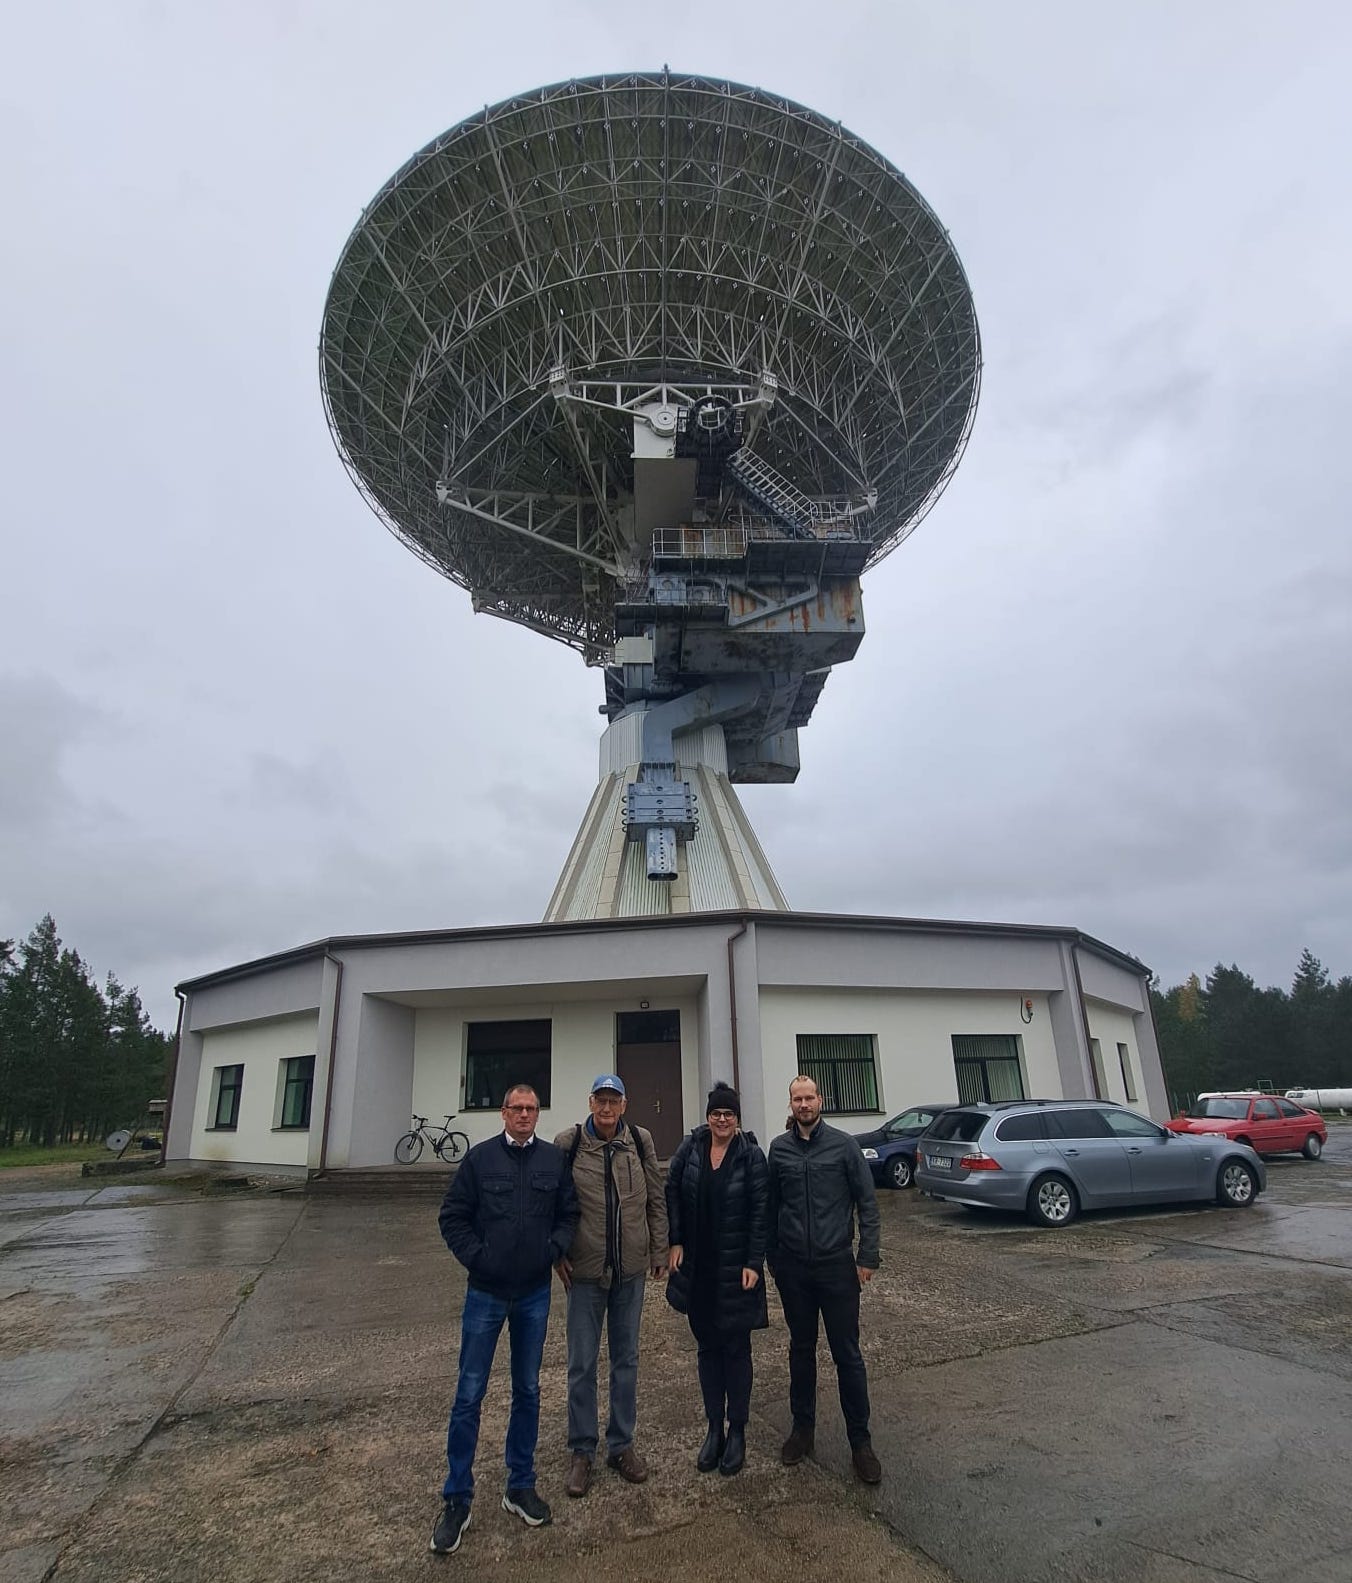  Photo: Visit to VIRAC's 32-metre telescope, refurbished between 2011 and 2016 and modernized in 2022. From left to right: VIRAC researchers Vladislavs Bezrukovs and Ivars Šmelds, JIVE director Agnieszka Słowikowska‪, ‪Head of Engineering at Ventspils International Radio Astronomy Mārcis Donerblics.